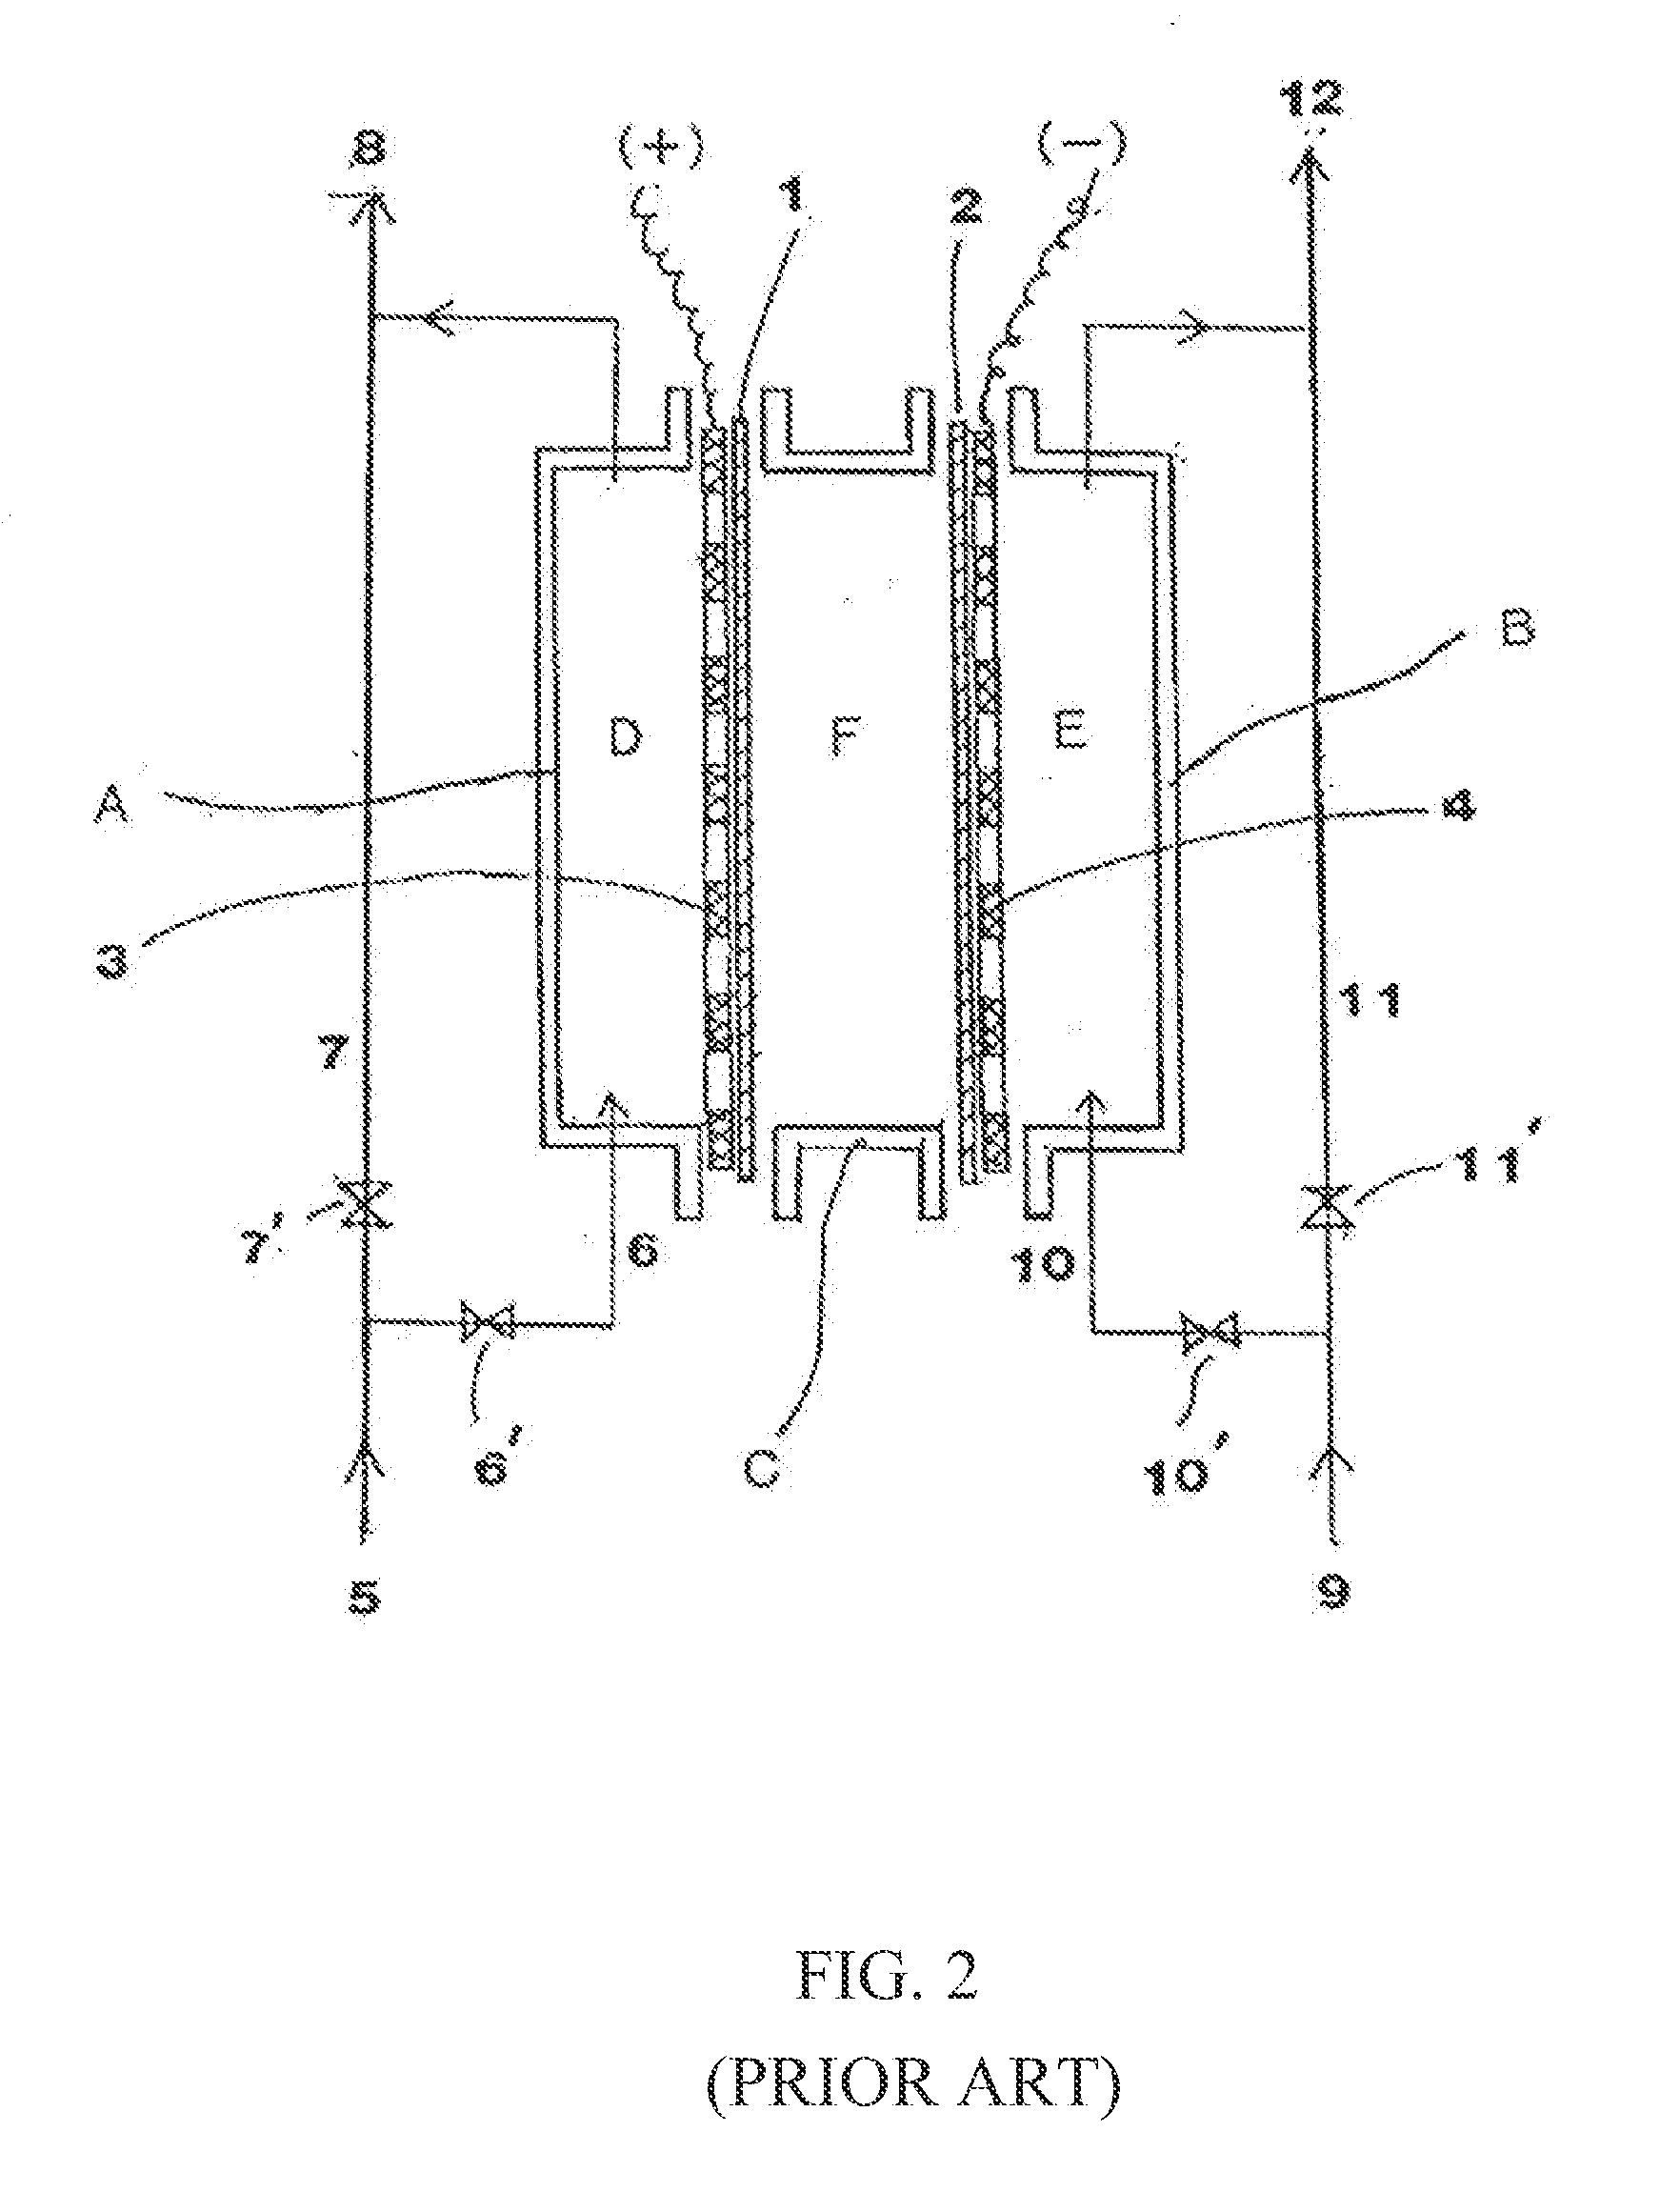 Dual Diaphragm Electrolysis cell assembly and method for generating a cleaning solution without any salt residues and simultaneously generating a sanitizing solution having a predetermined level of available free chlorine and PH